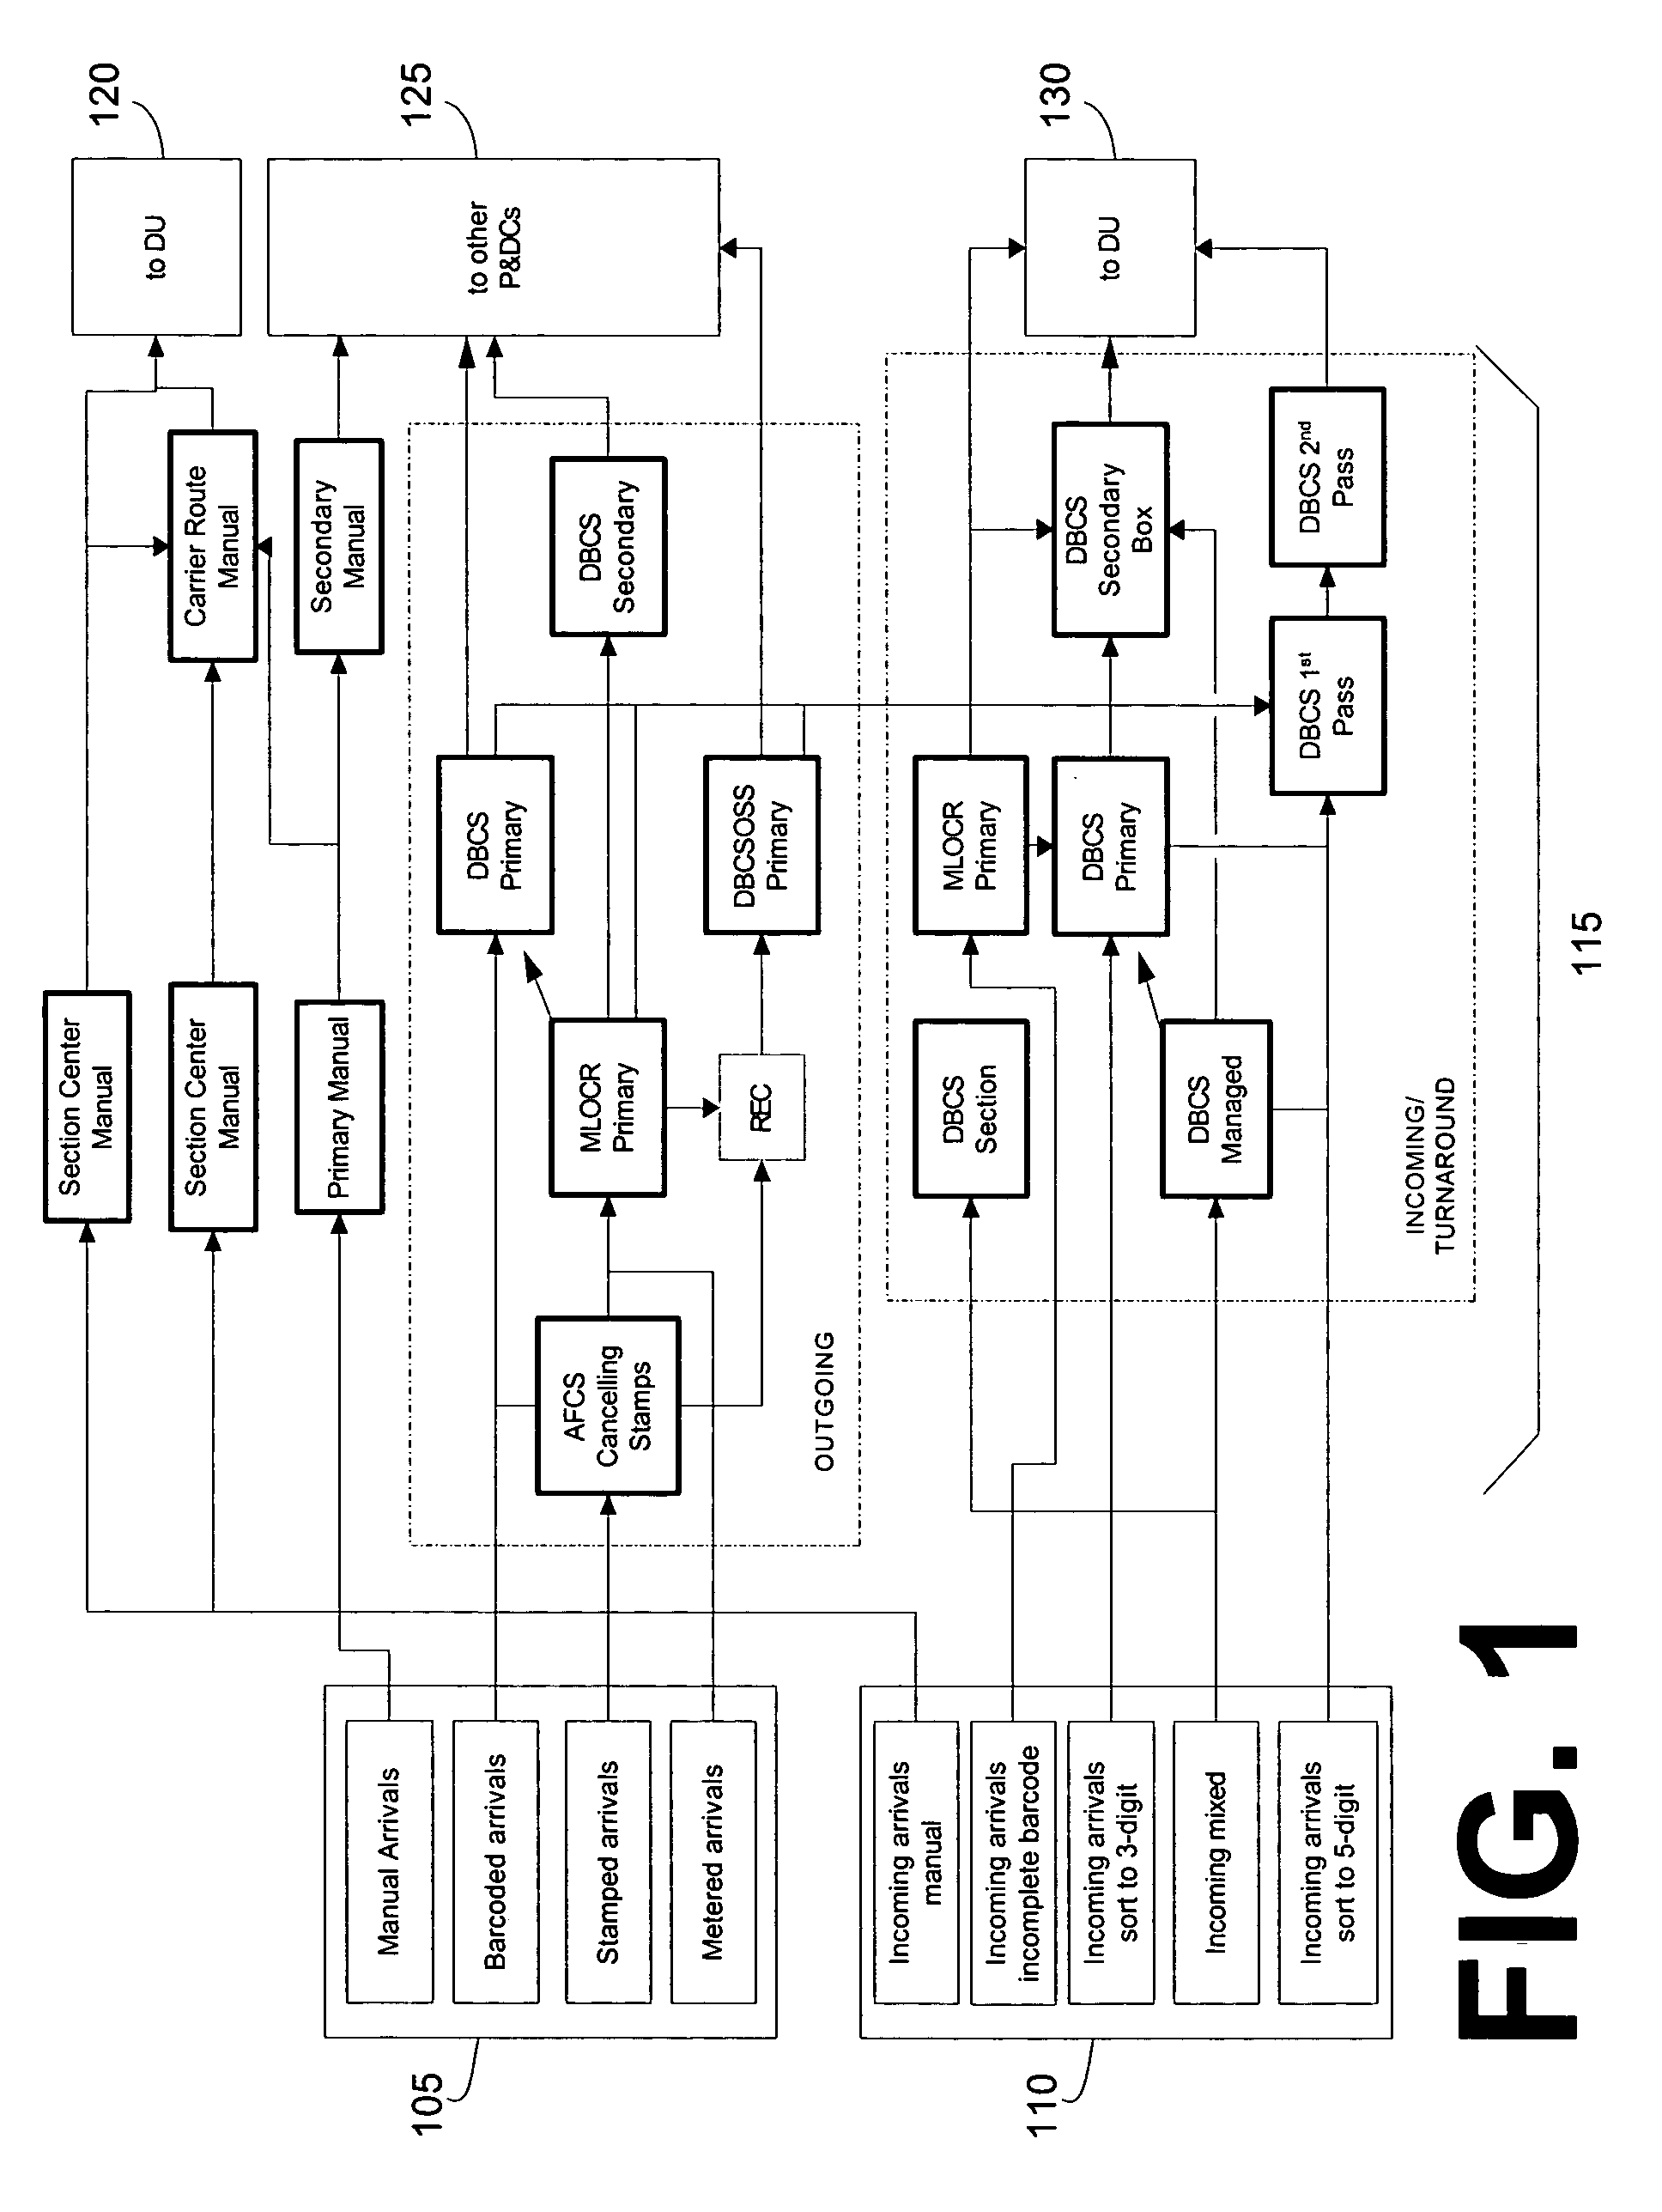 System and method for optimizing equipment schedules